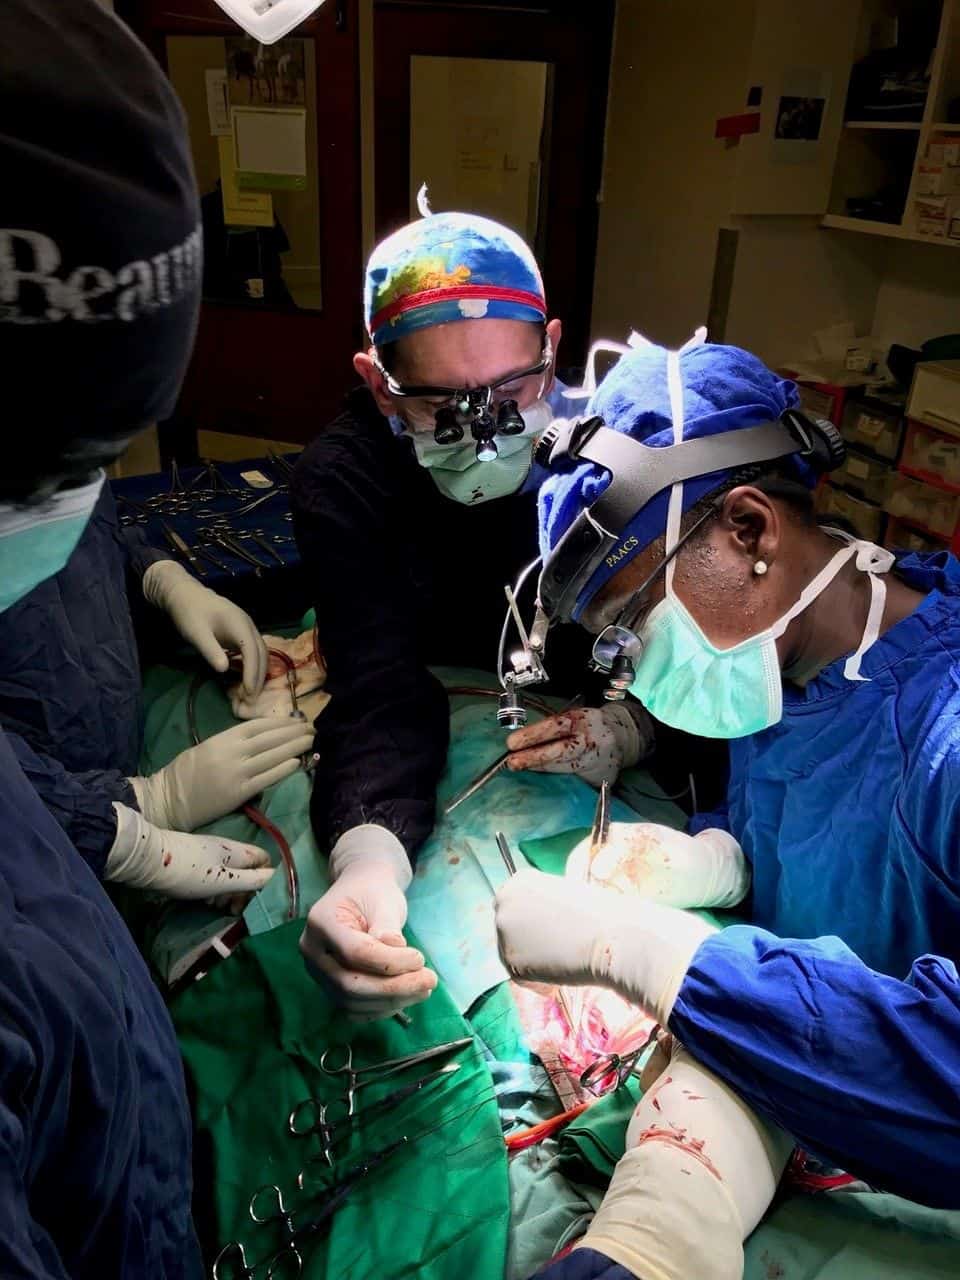 Dr. David Horne performs open-heart surgery alongside surgeons from Tenwek Hospital. The goal of the World Medical Missions teams is to train Tenwek's surgeons to perform increasingly complex open-heart procedures.